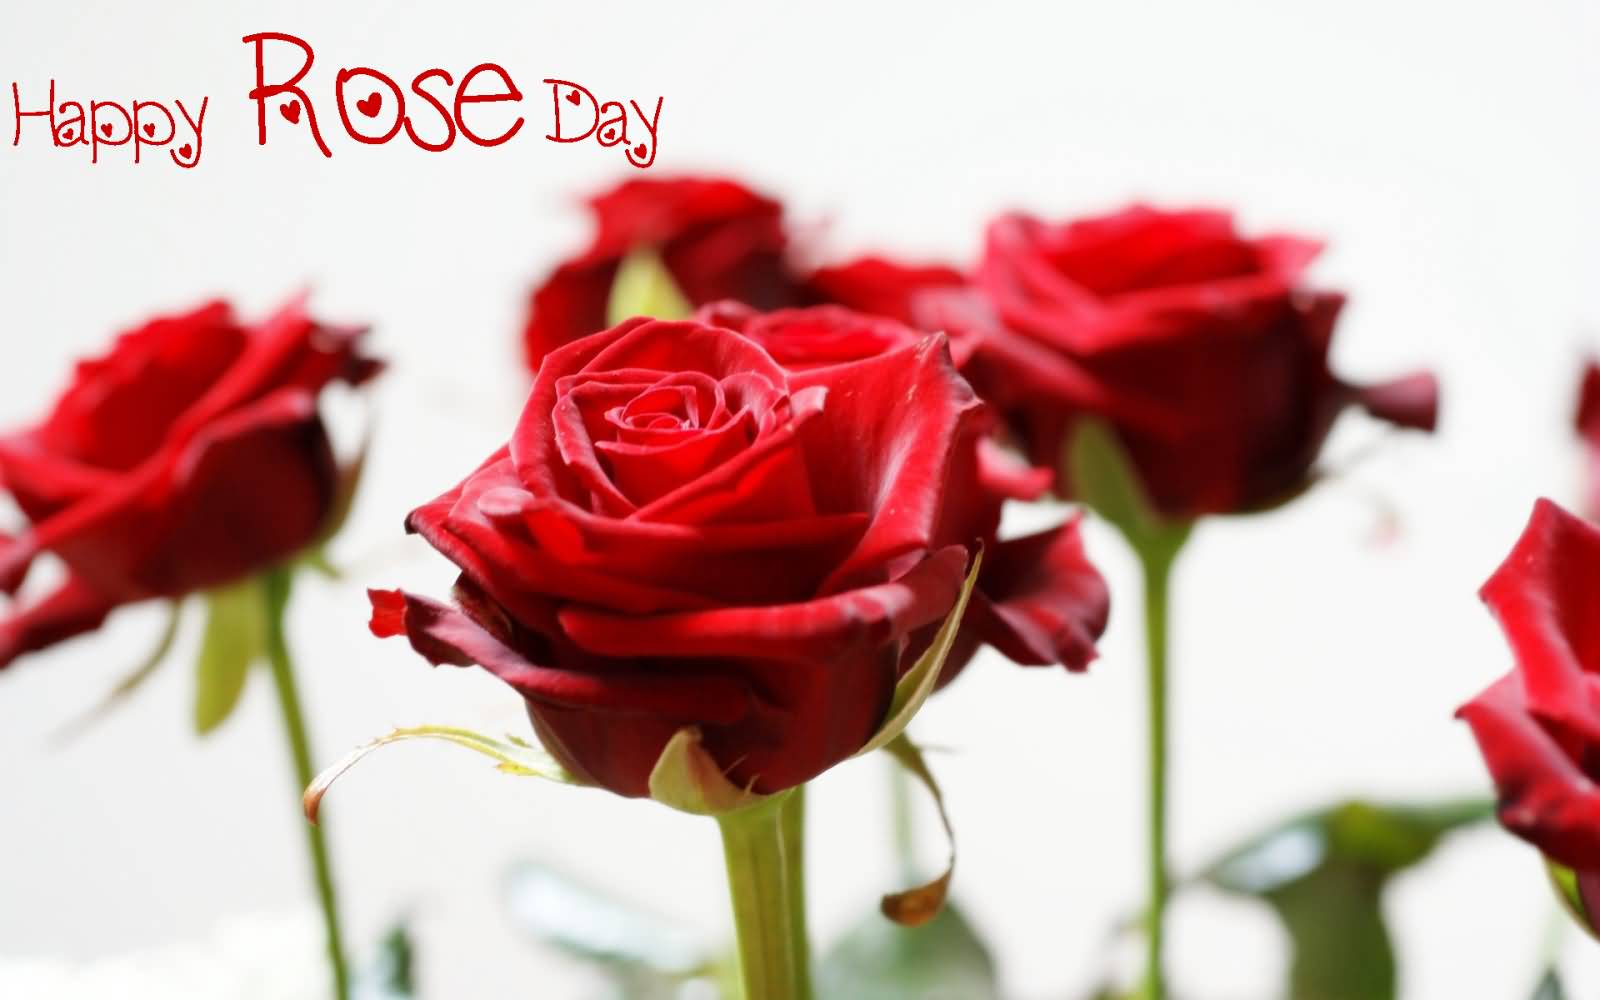 Happy Rose Day 2017 Wishes